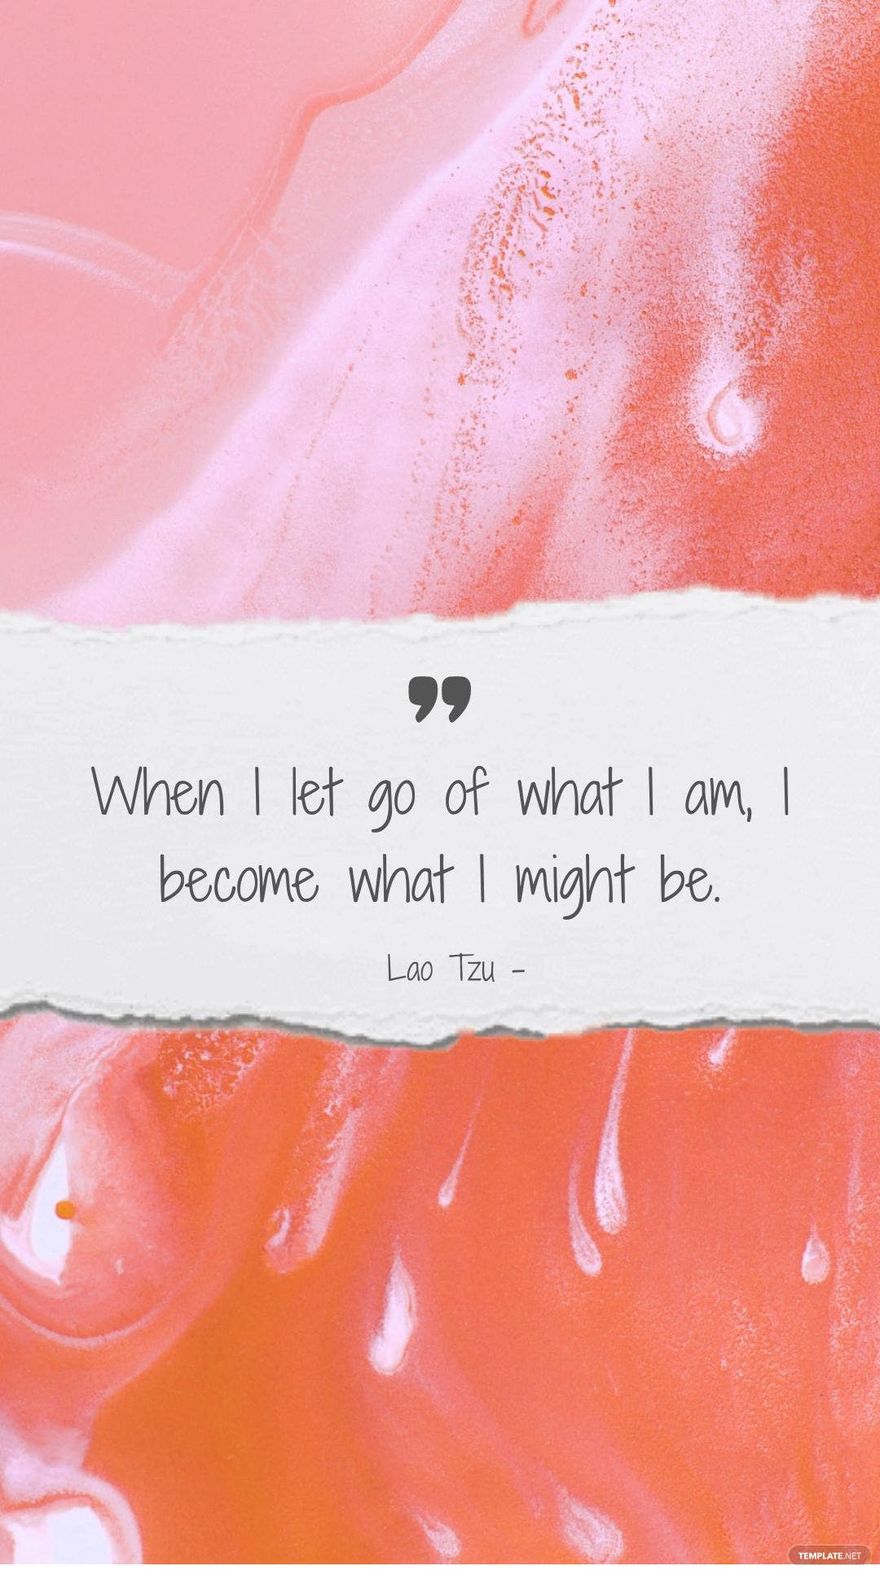 Lao Tzu - When I let go of what I am, I become what I might be.